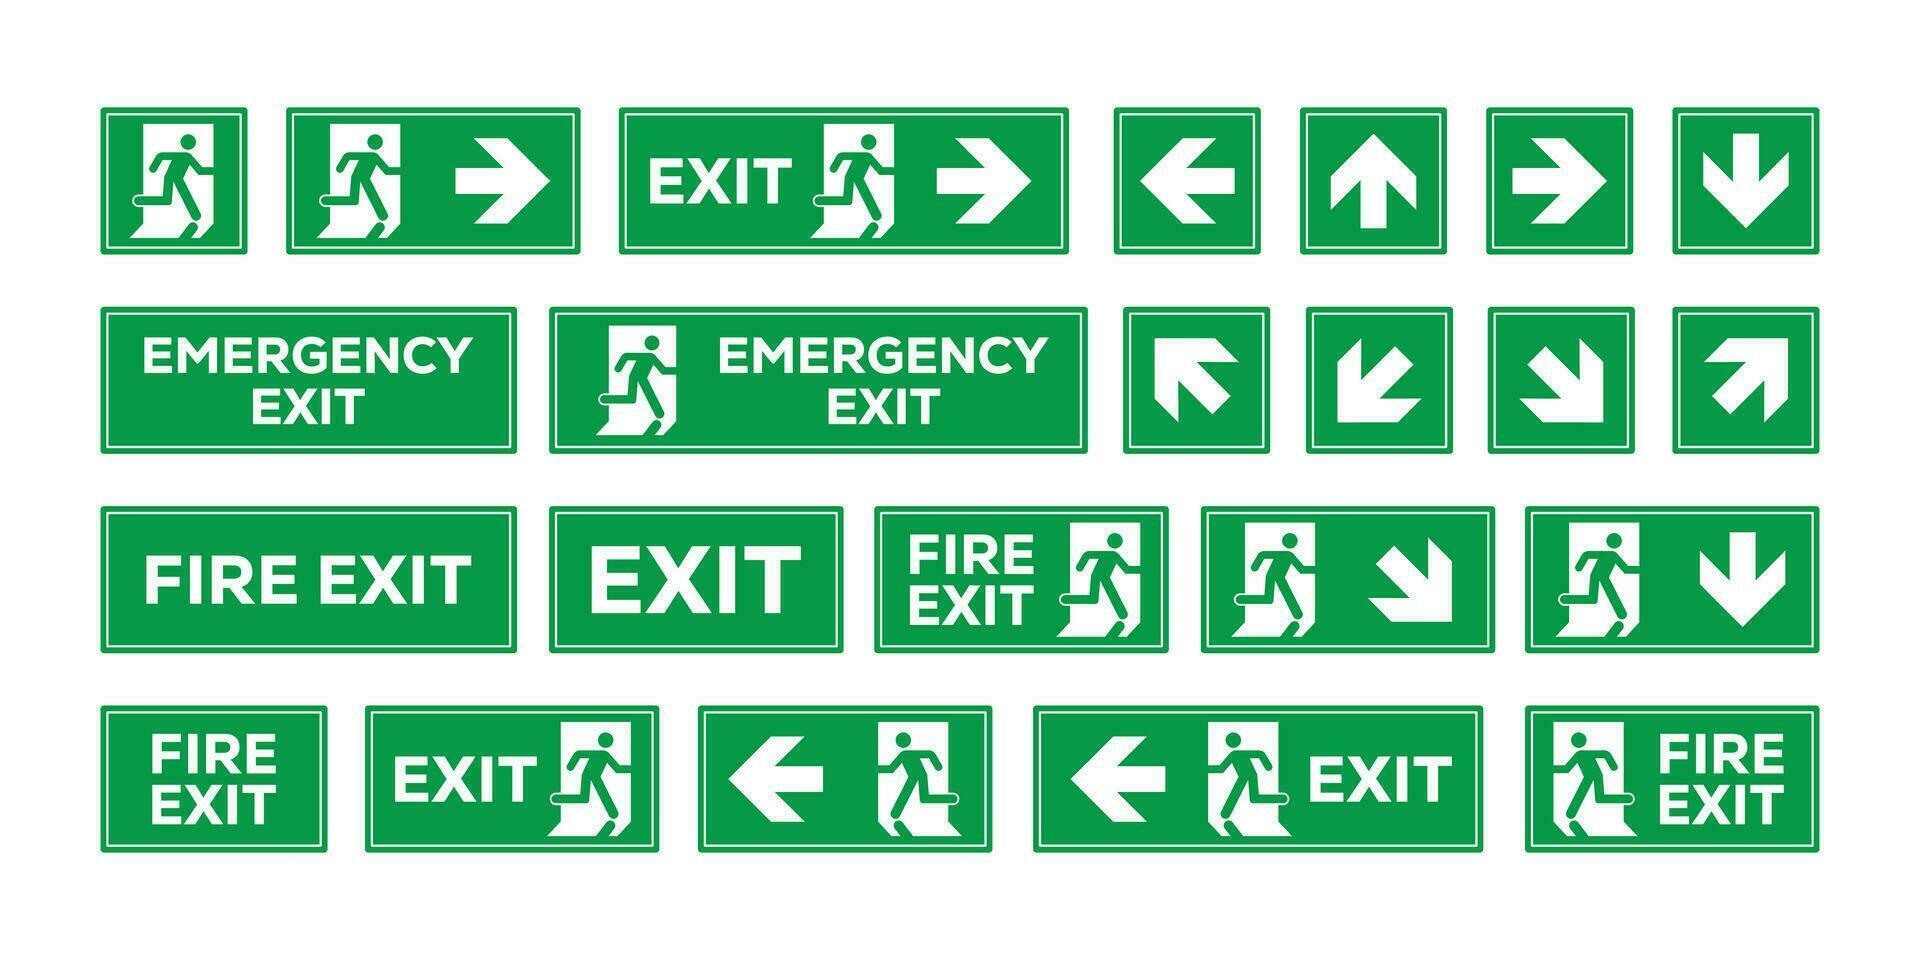 Emergency exit sign set. Emergency and fire exit icons. Man running out arrow, green background. vector